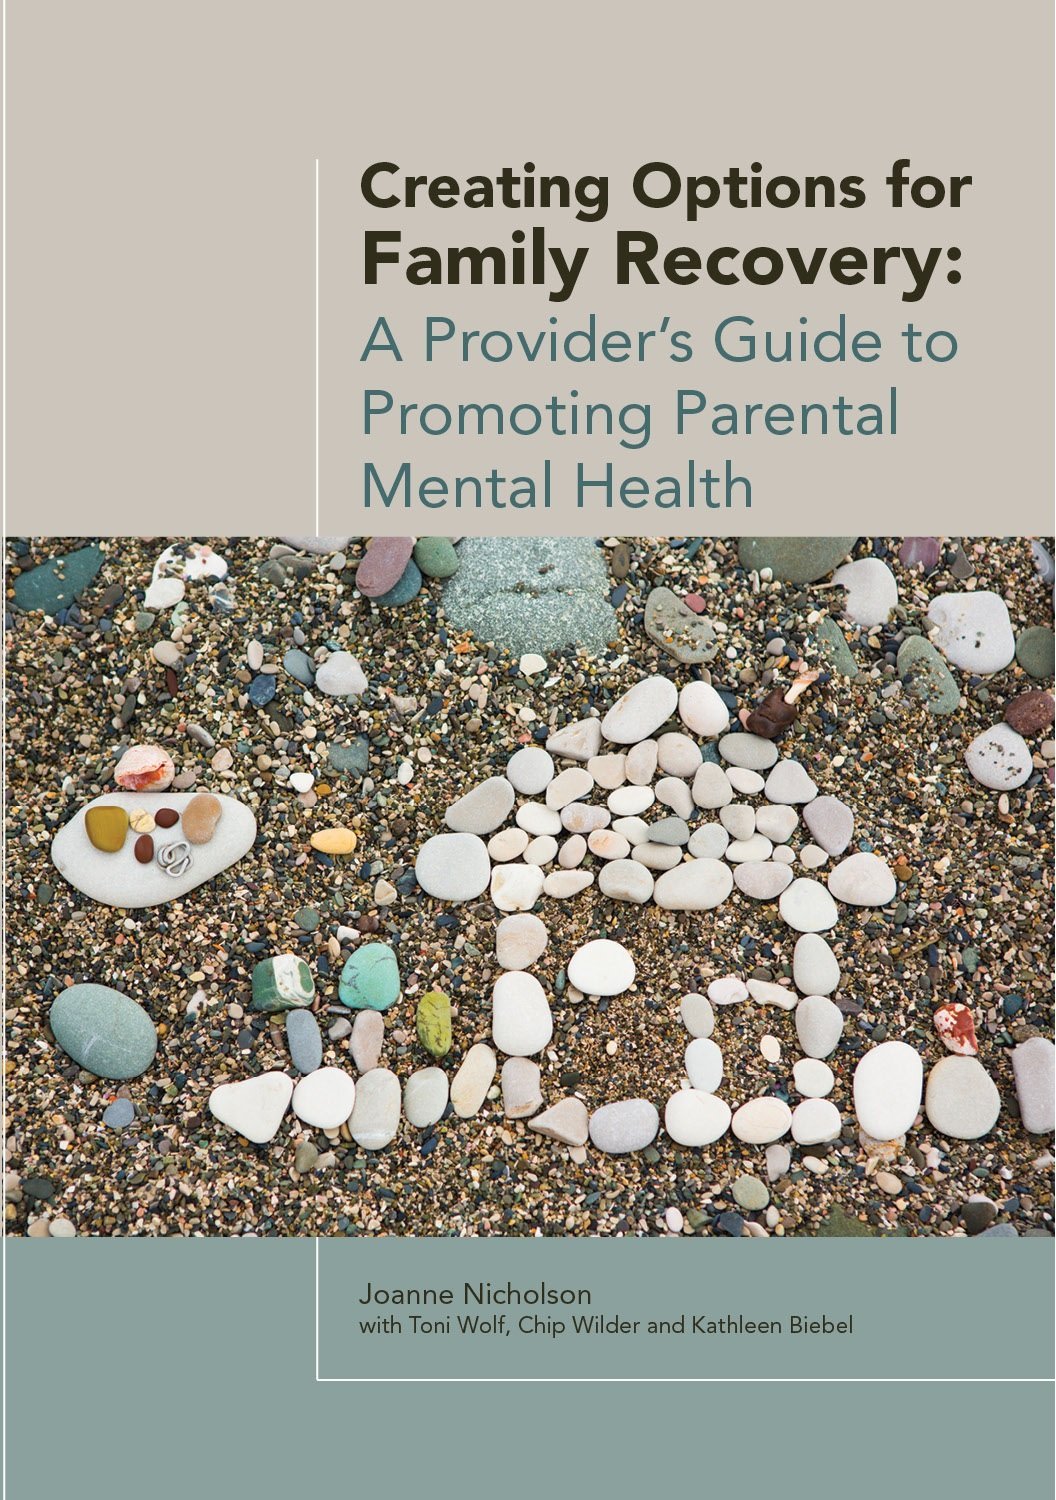 Creating Options for Family Recovery